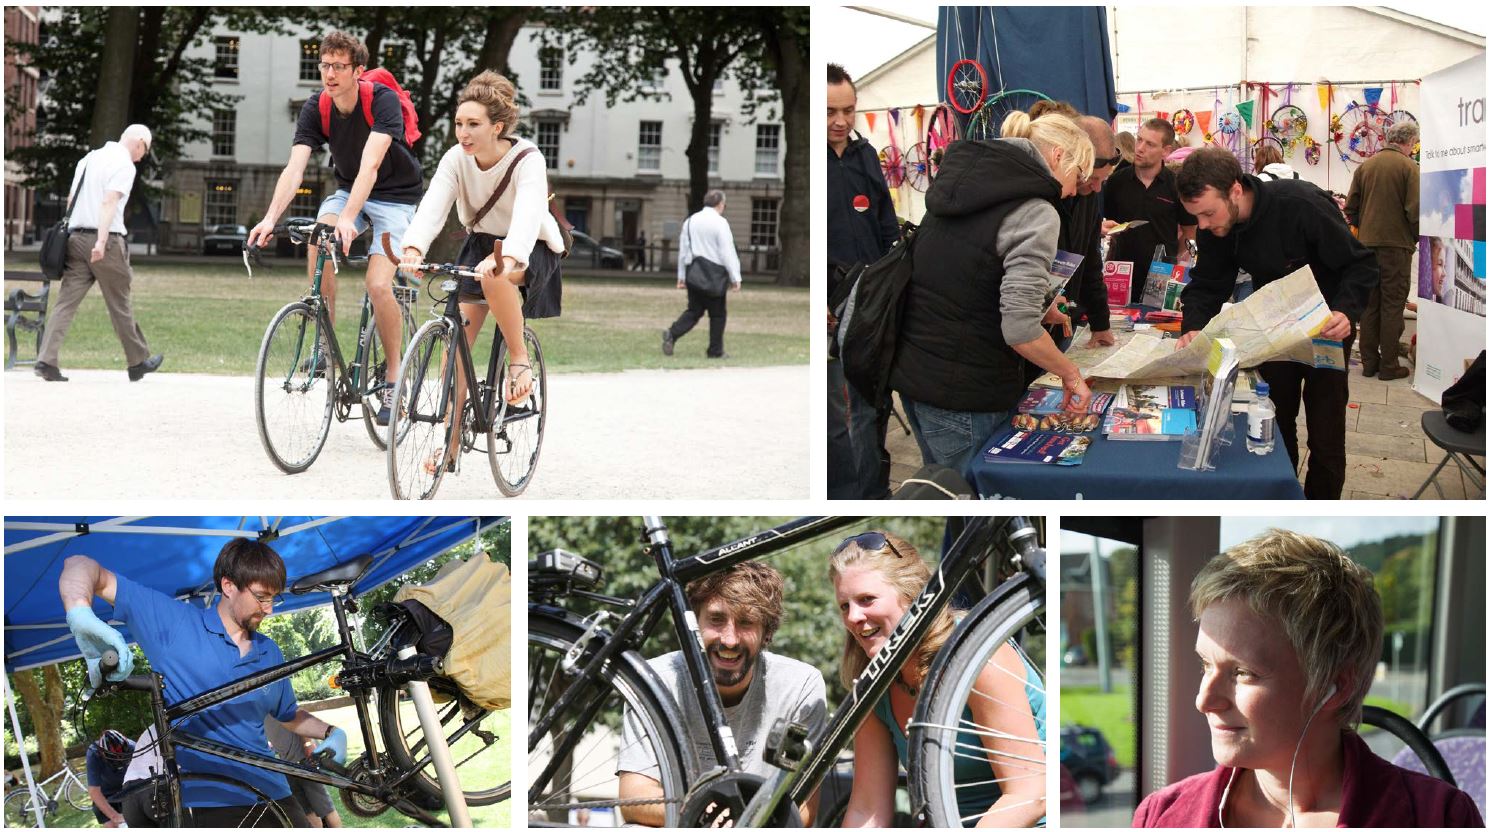 Previous campaigns used photos of people cycling, engaging in discussion over a map, checking their bikes, on the bus...